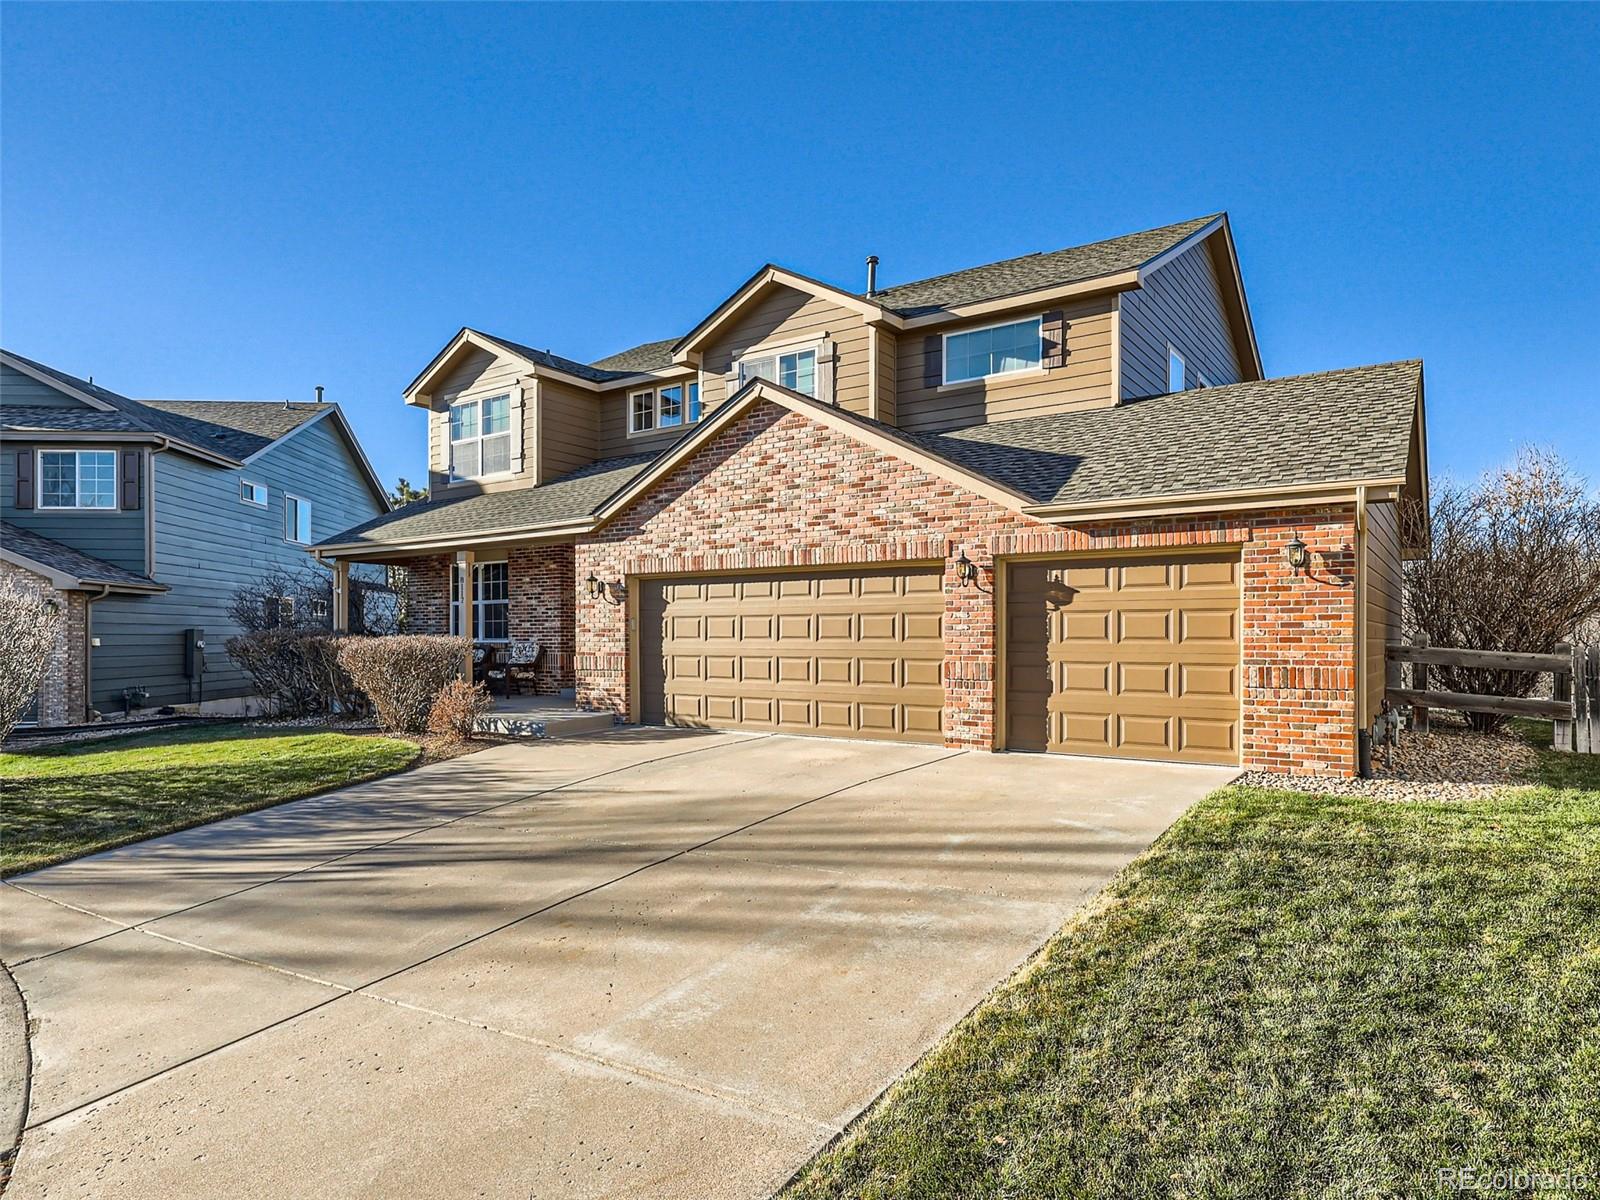 8117  oak briar way, Castle Pines sold home. Closed on 2024-03-20 for $878,850.